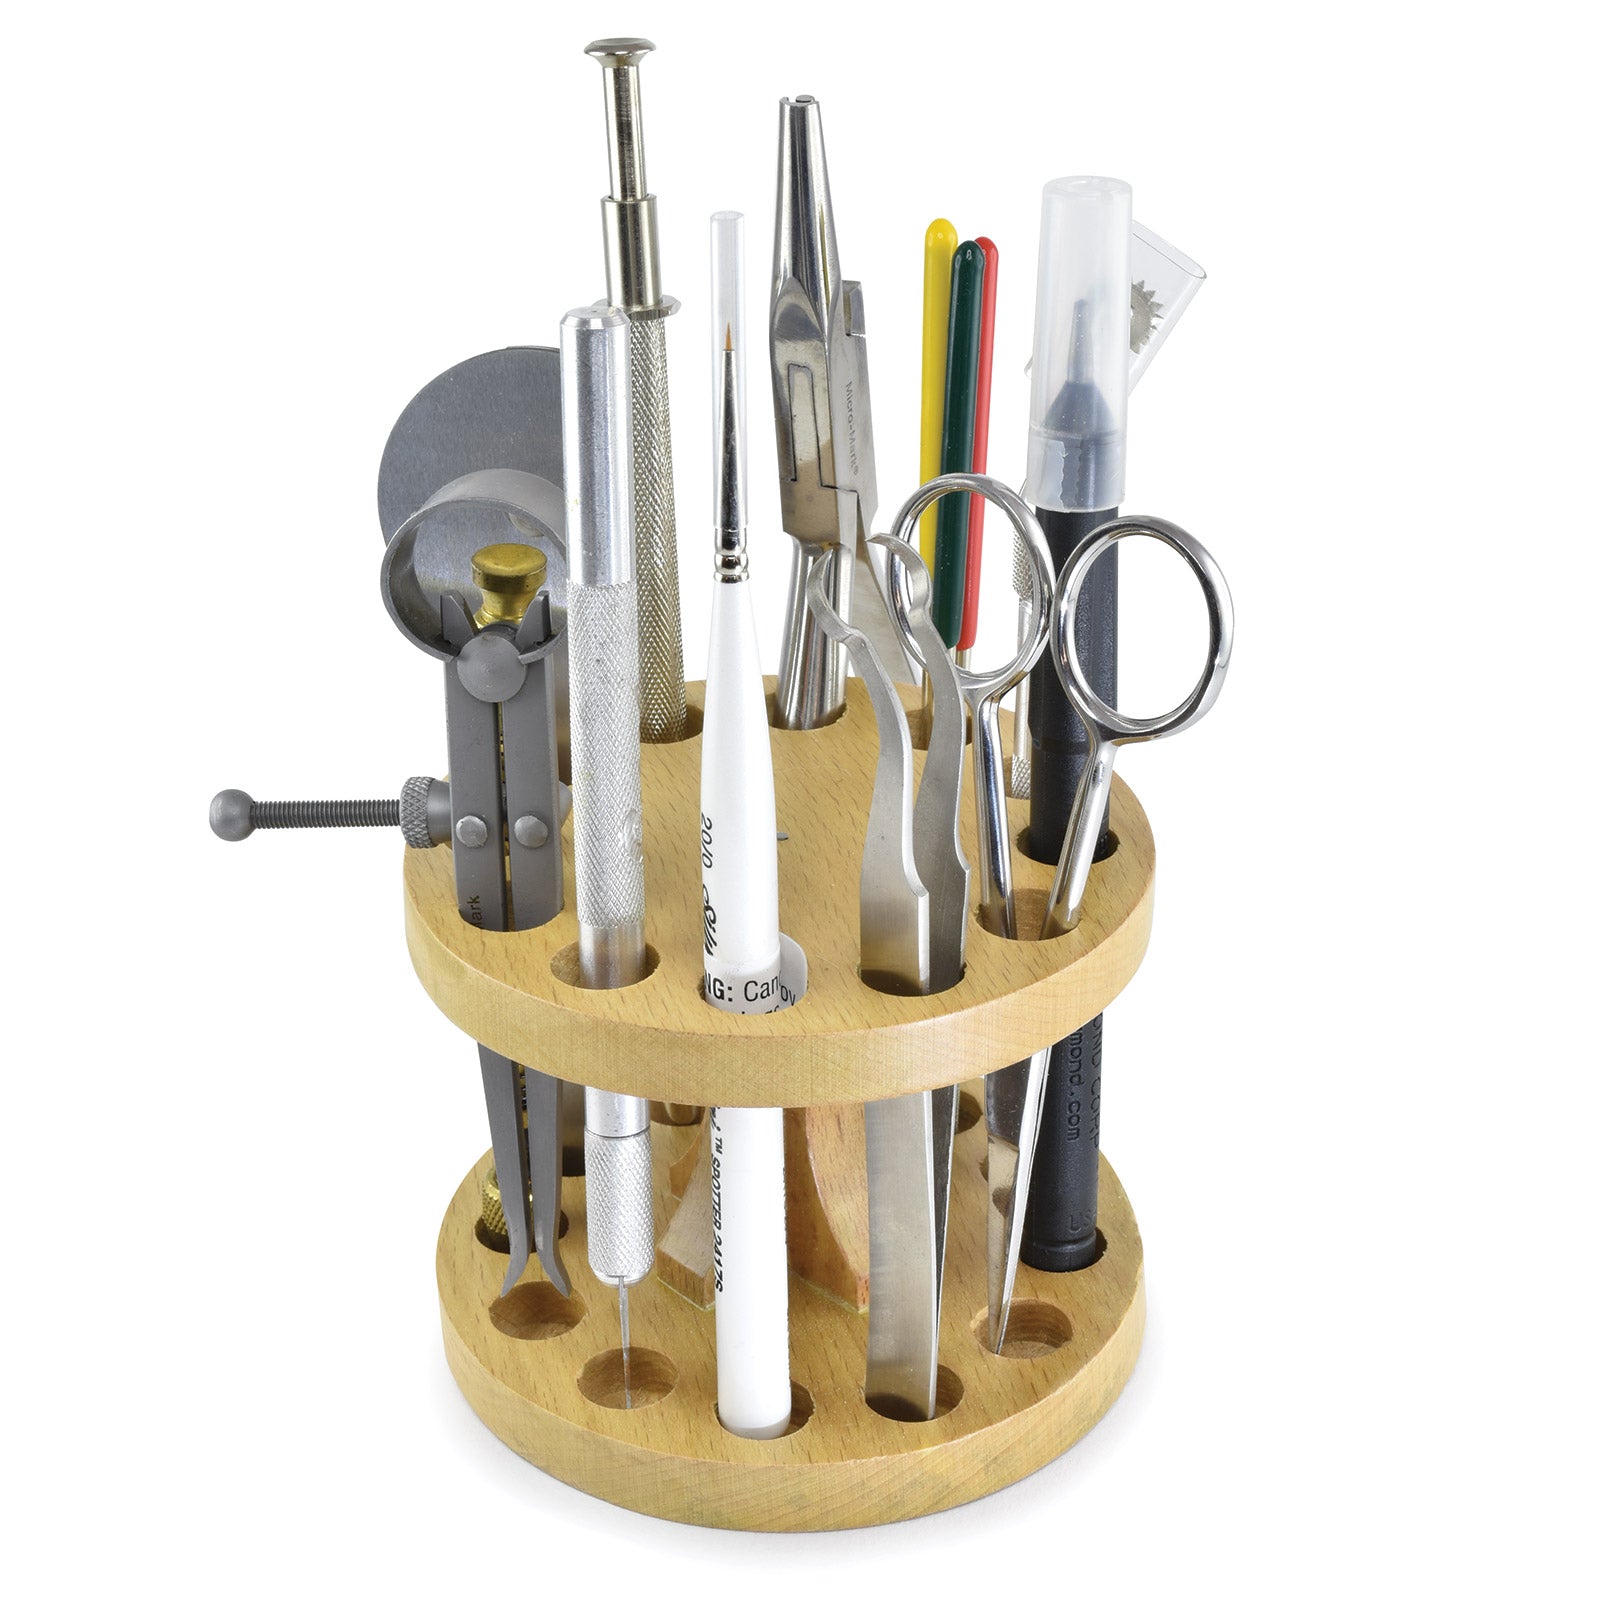 12 - Space Wooden Tool Organizer